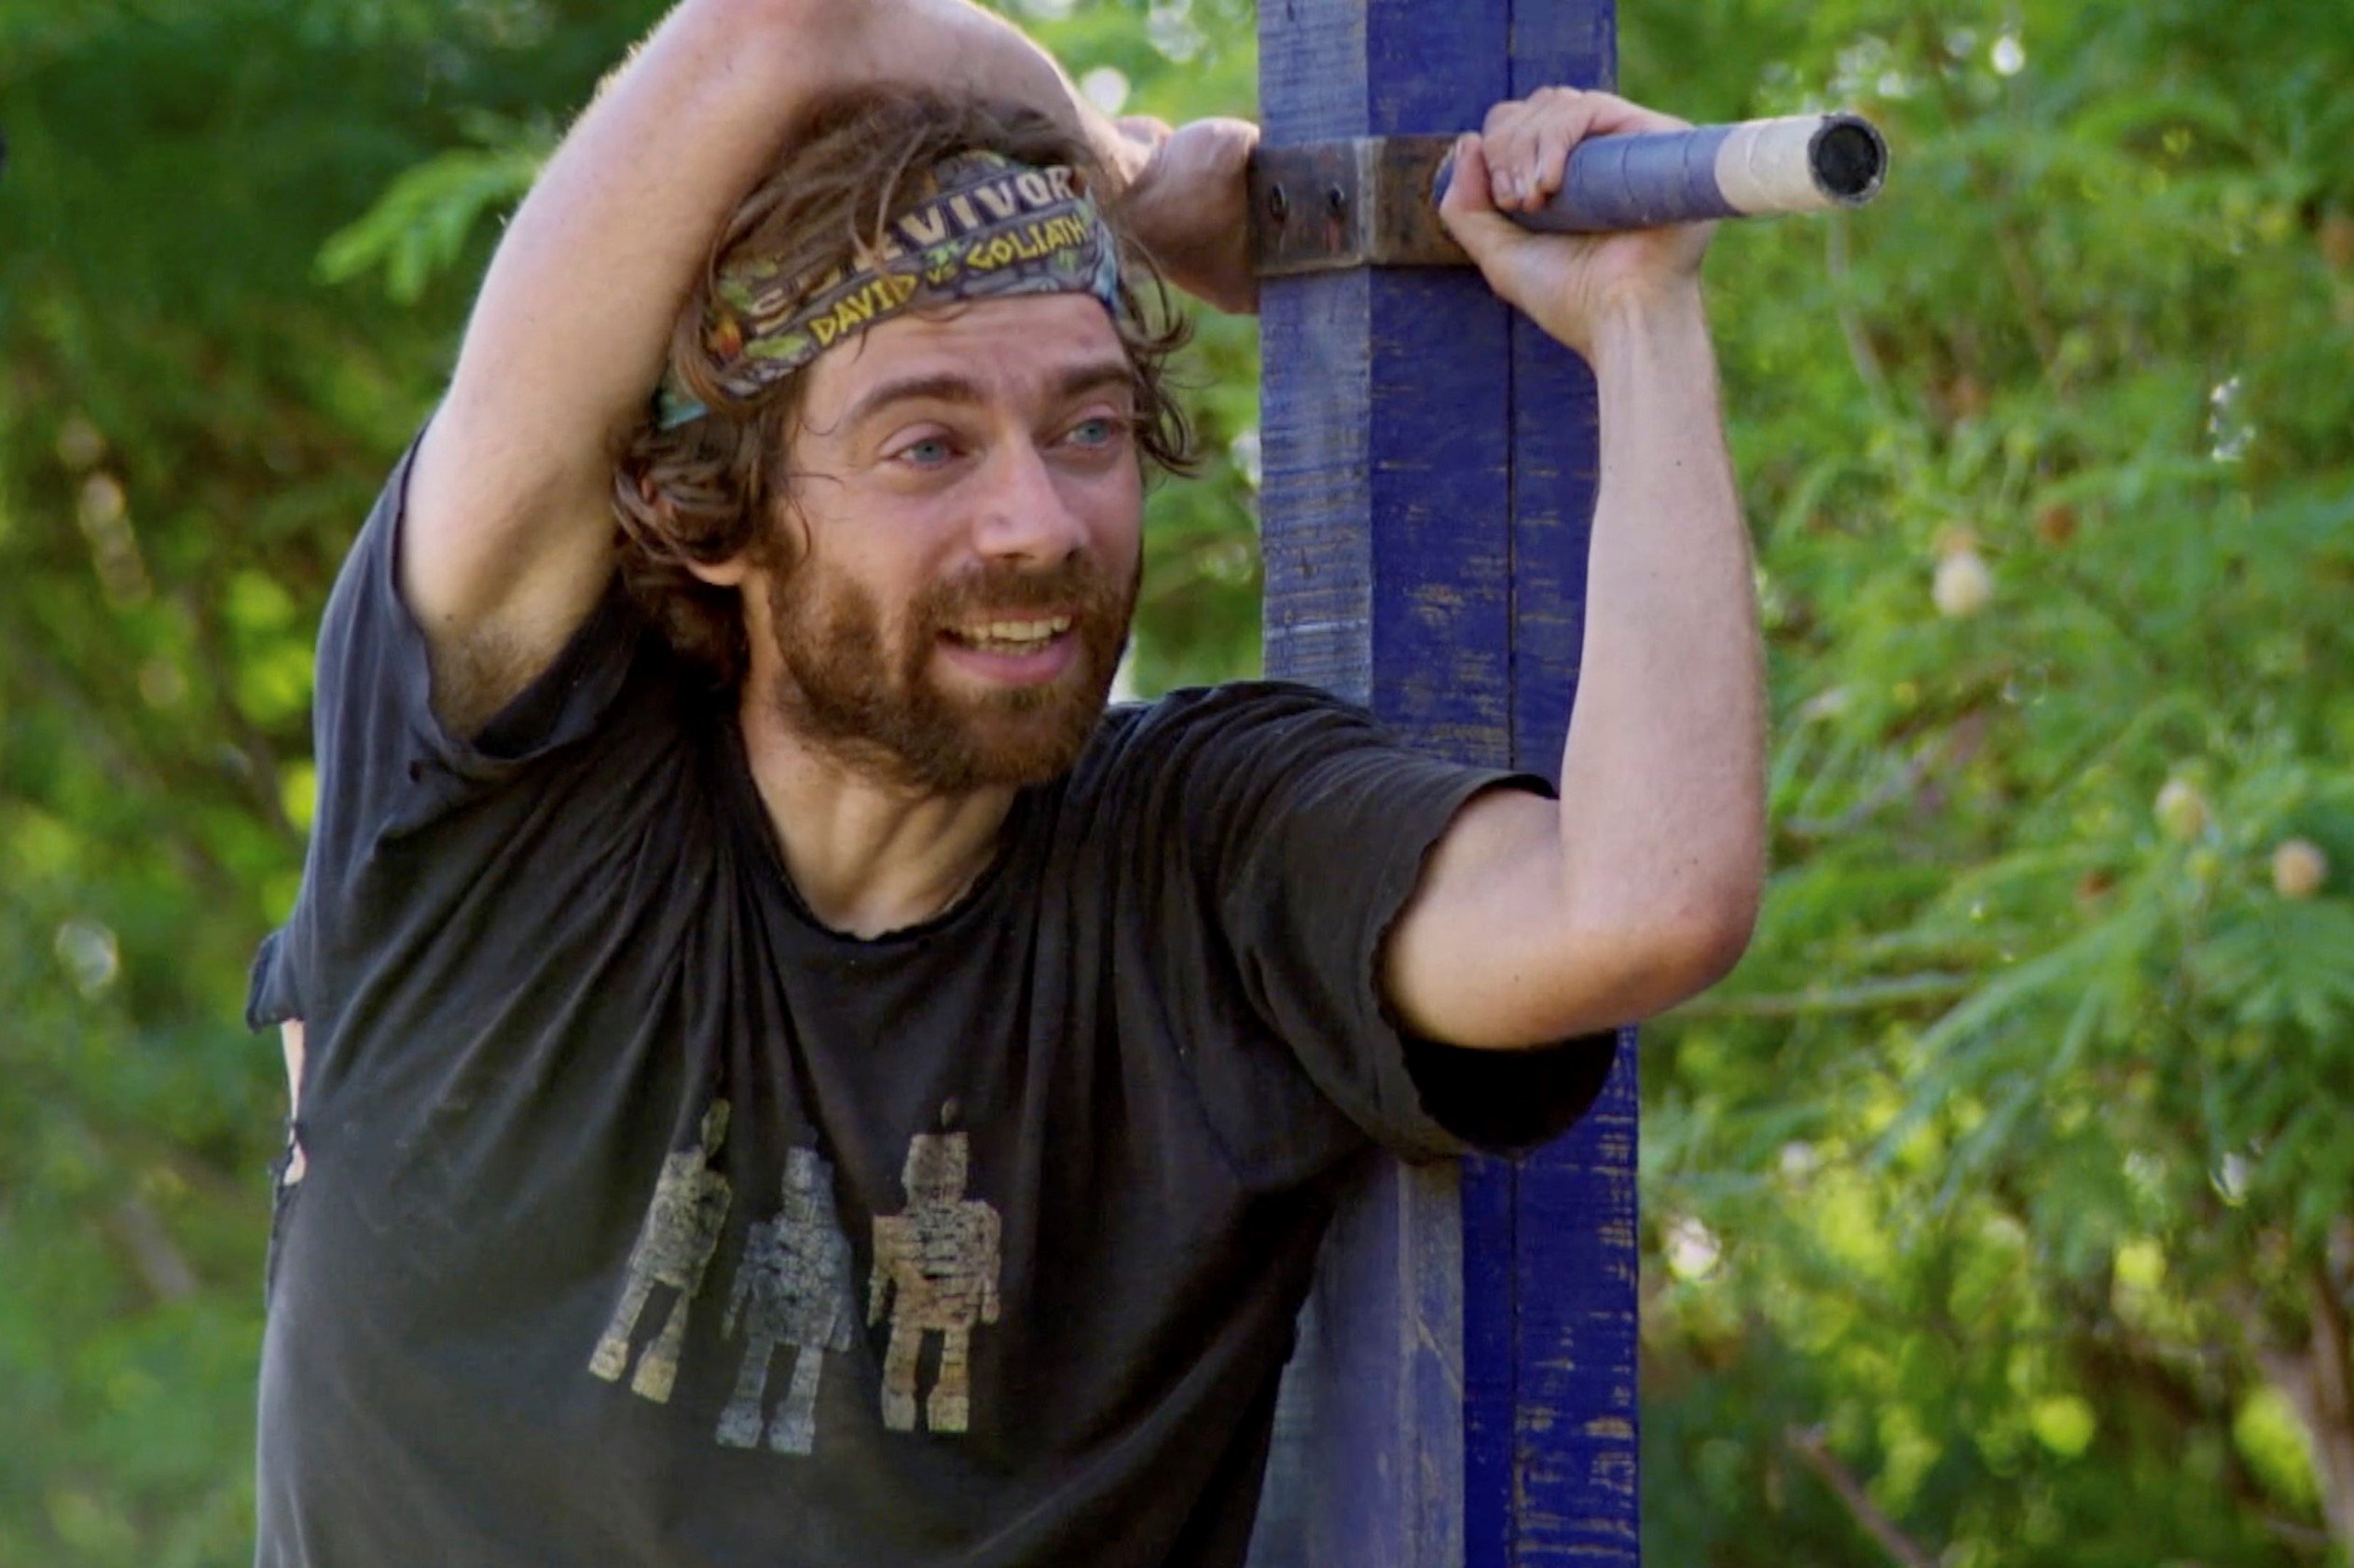 Christian Hubicki, who many fans want to see return to 'Survivor' in an All-Stars season,